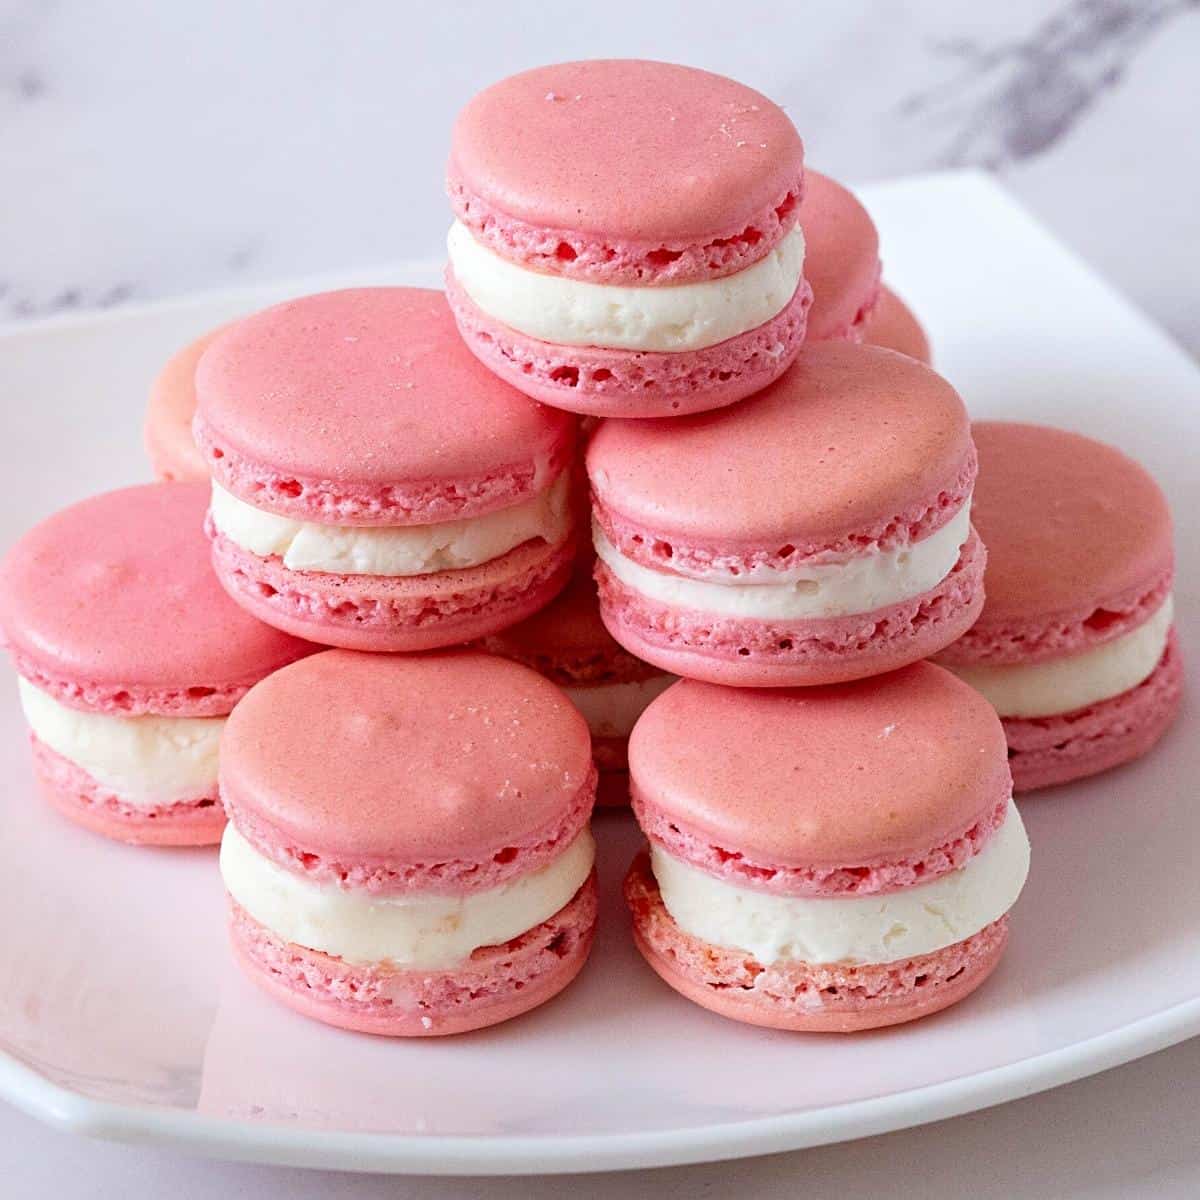 A stack of pink macarons filling with strawberry filling.